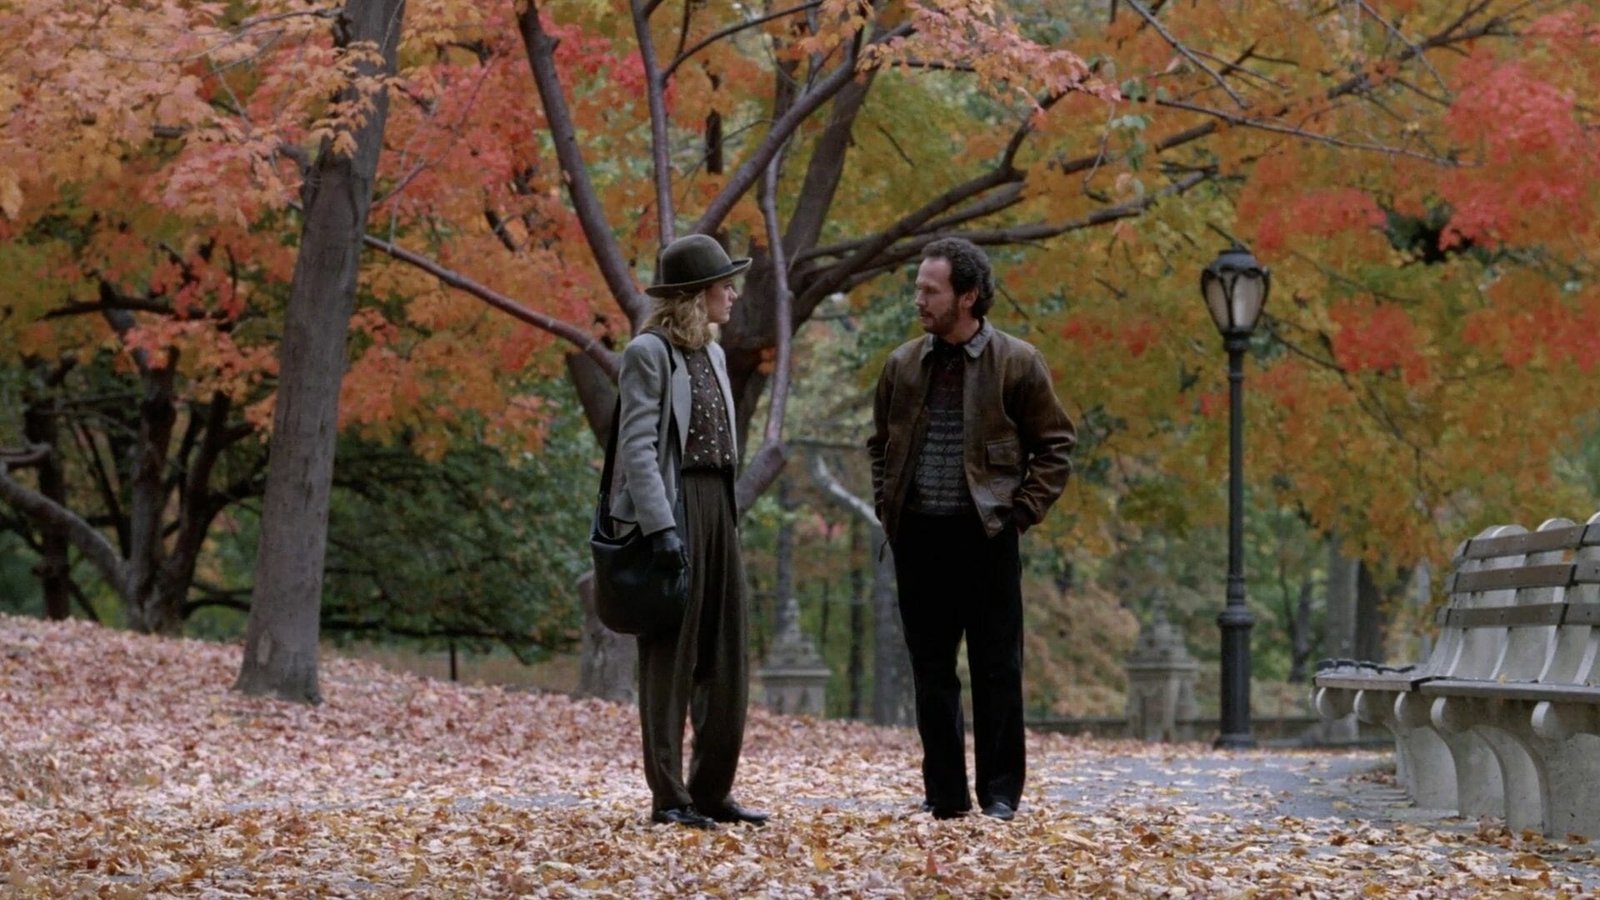 Best movies on HBO max: When Harry Met Sally (1989) 